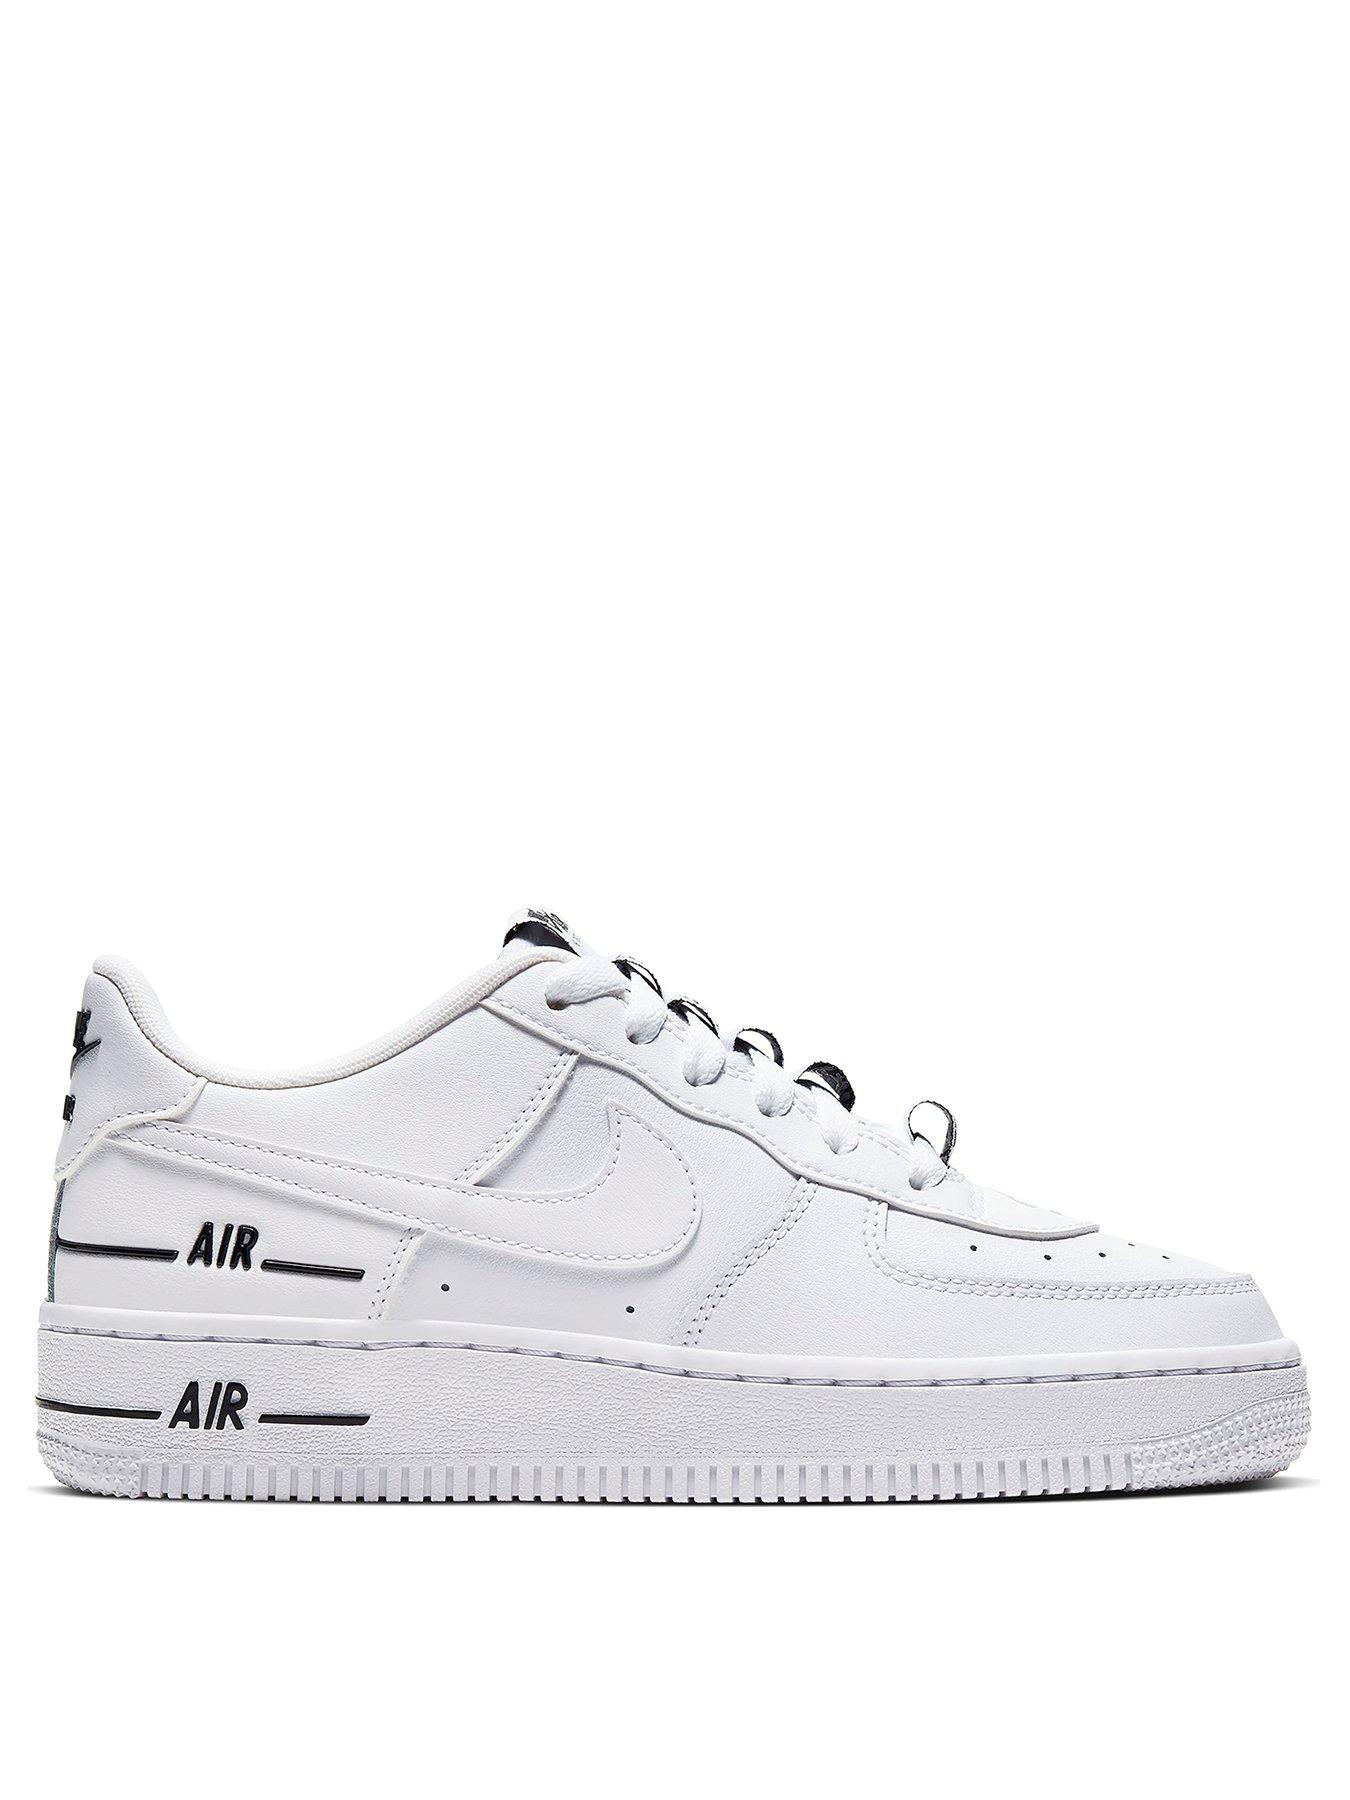 white air force 1 junior size 3